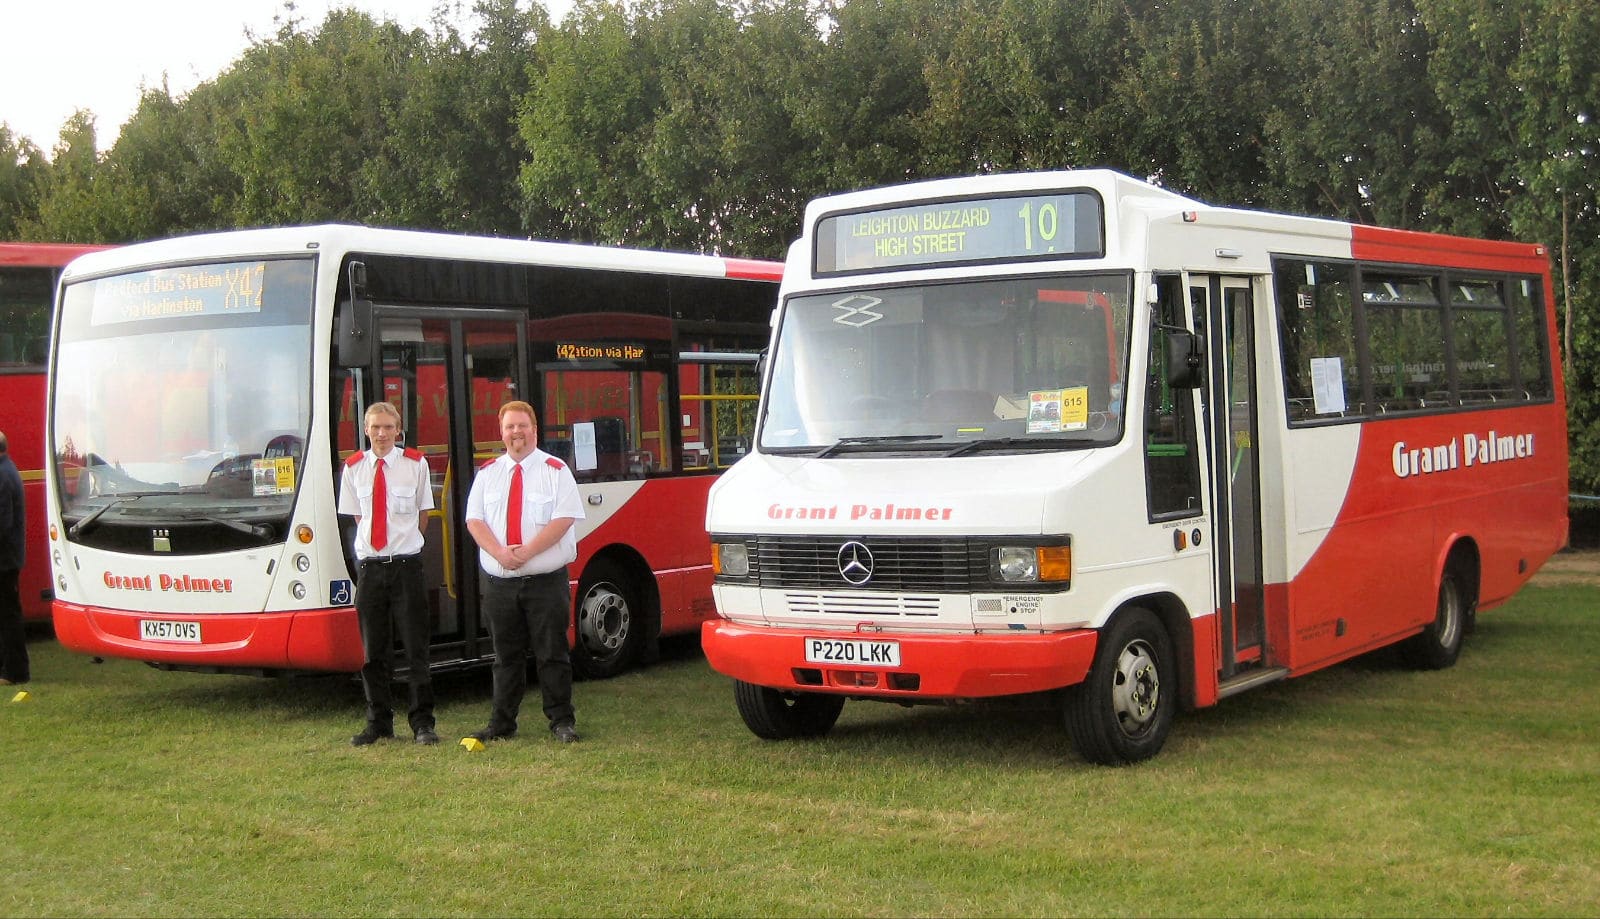 Showbus 50 to mark end of rally event